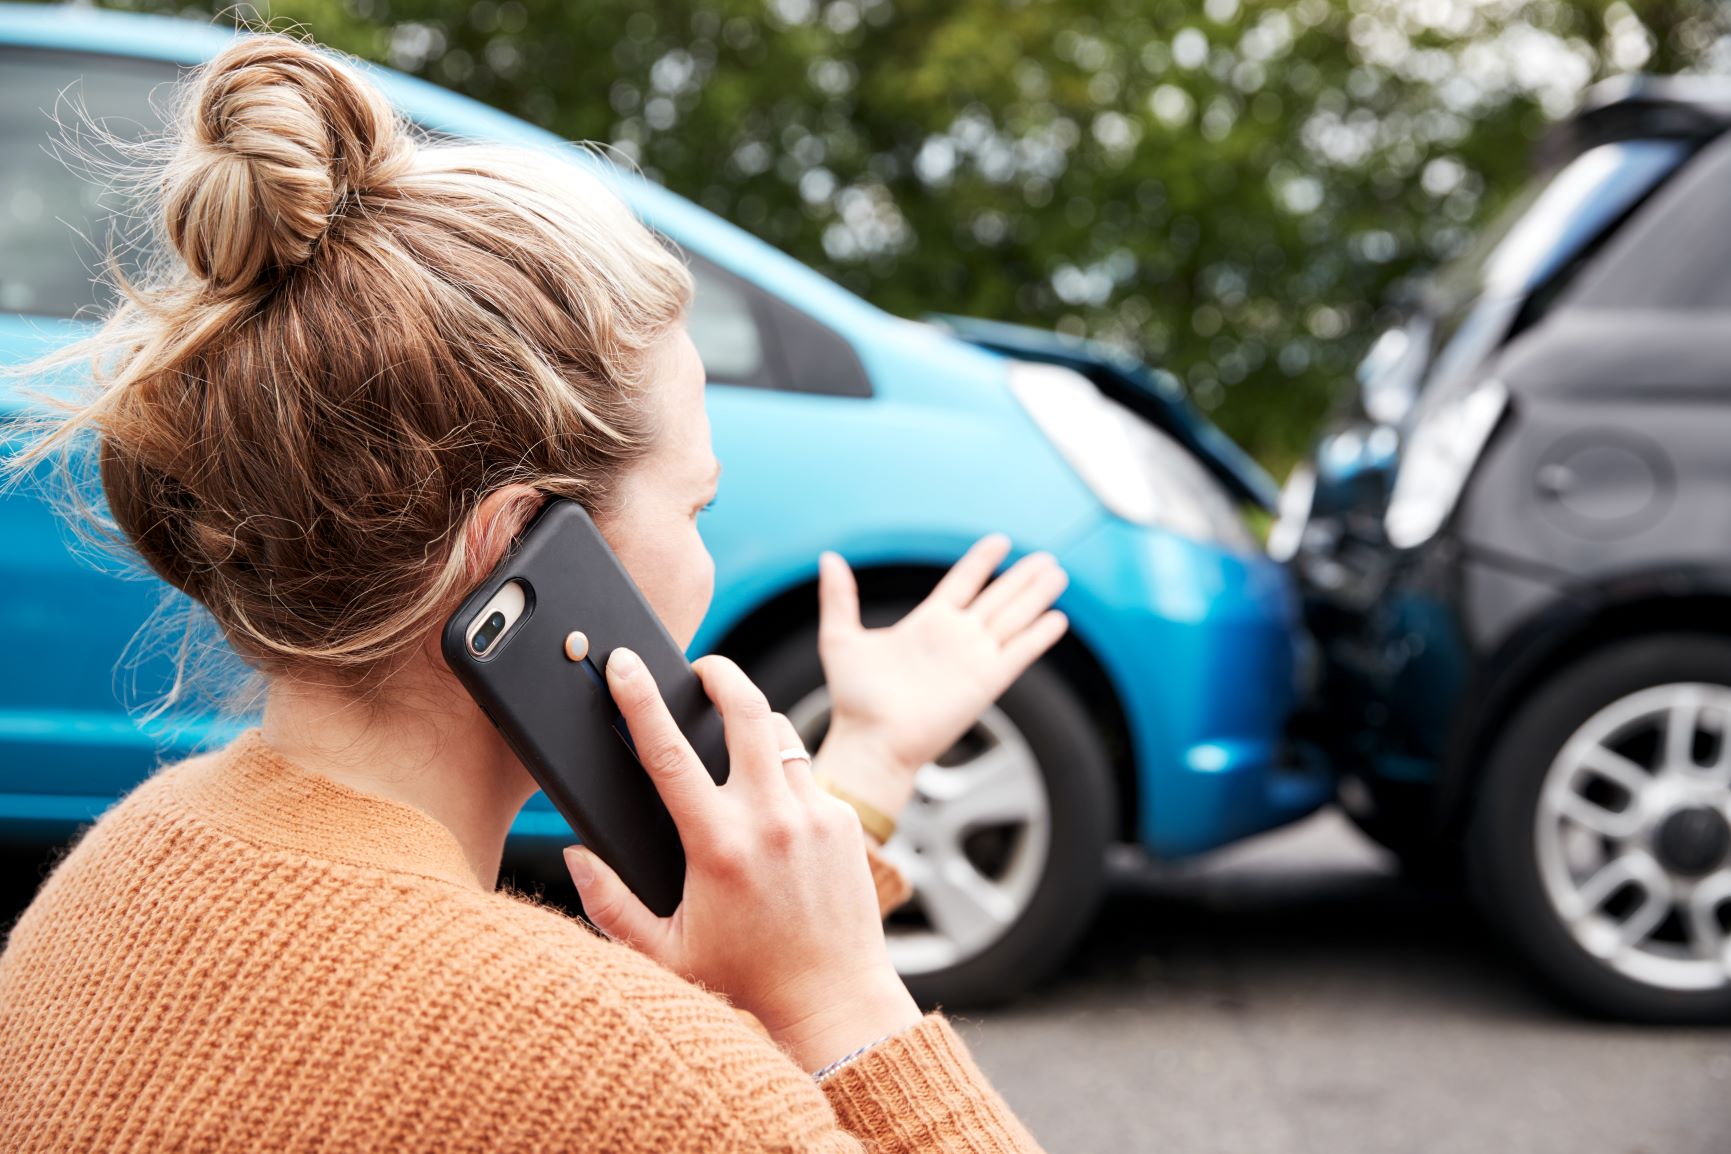 Everything You Need to Consider When Insuring Your Vehicle